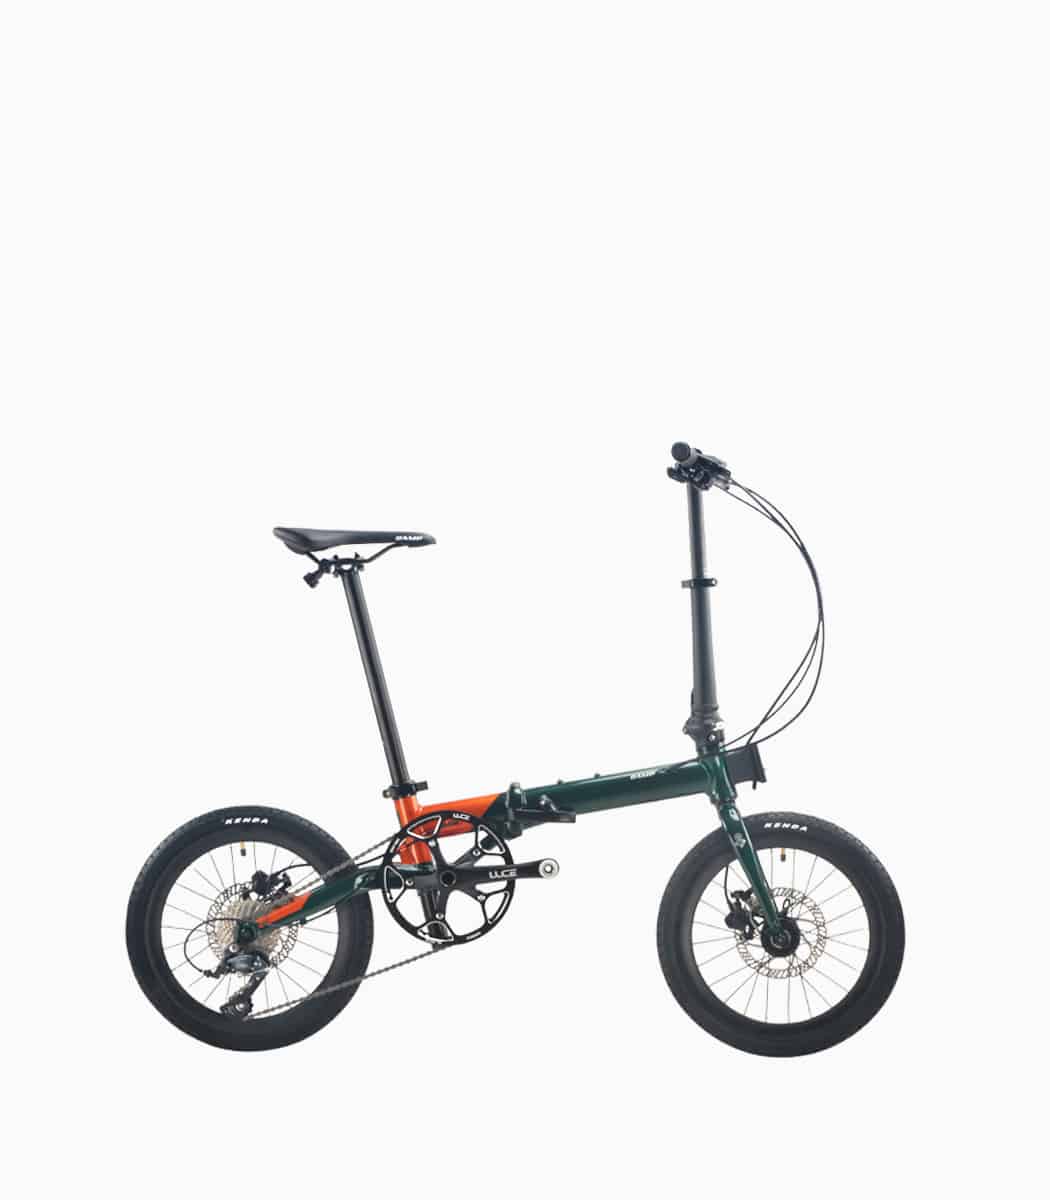 CAMP Lite Plus (GREEN-ORANGE) foldable bicycle right